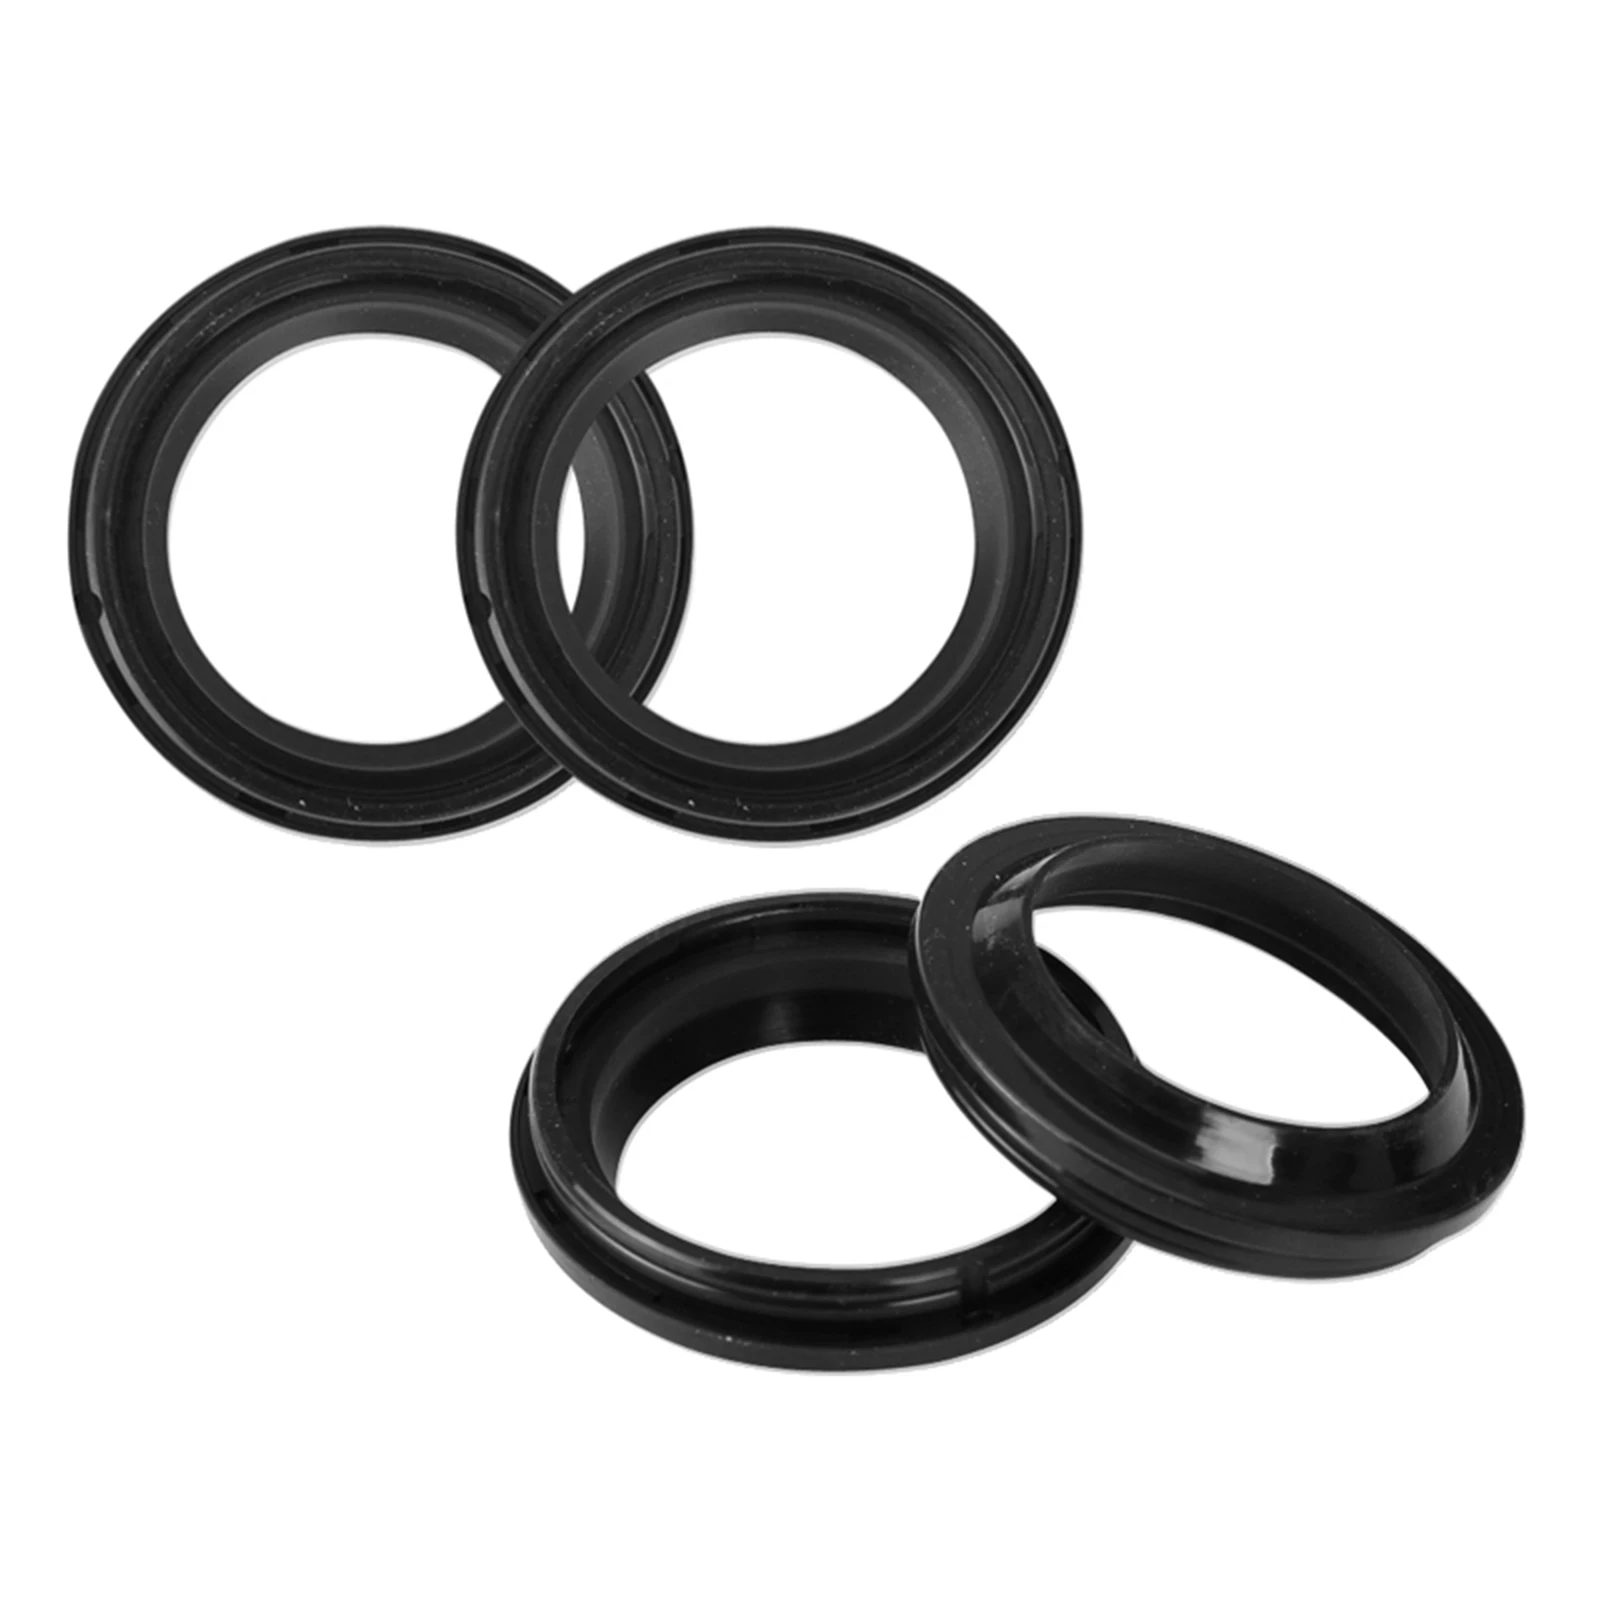 Motorcycles Fork Damper Shock Absorber Oil Seal and Dust Seal Set 39x52x11mm for 3XV R1 Kawasaki BMW 250 52X39-11